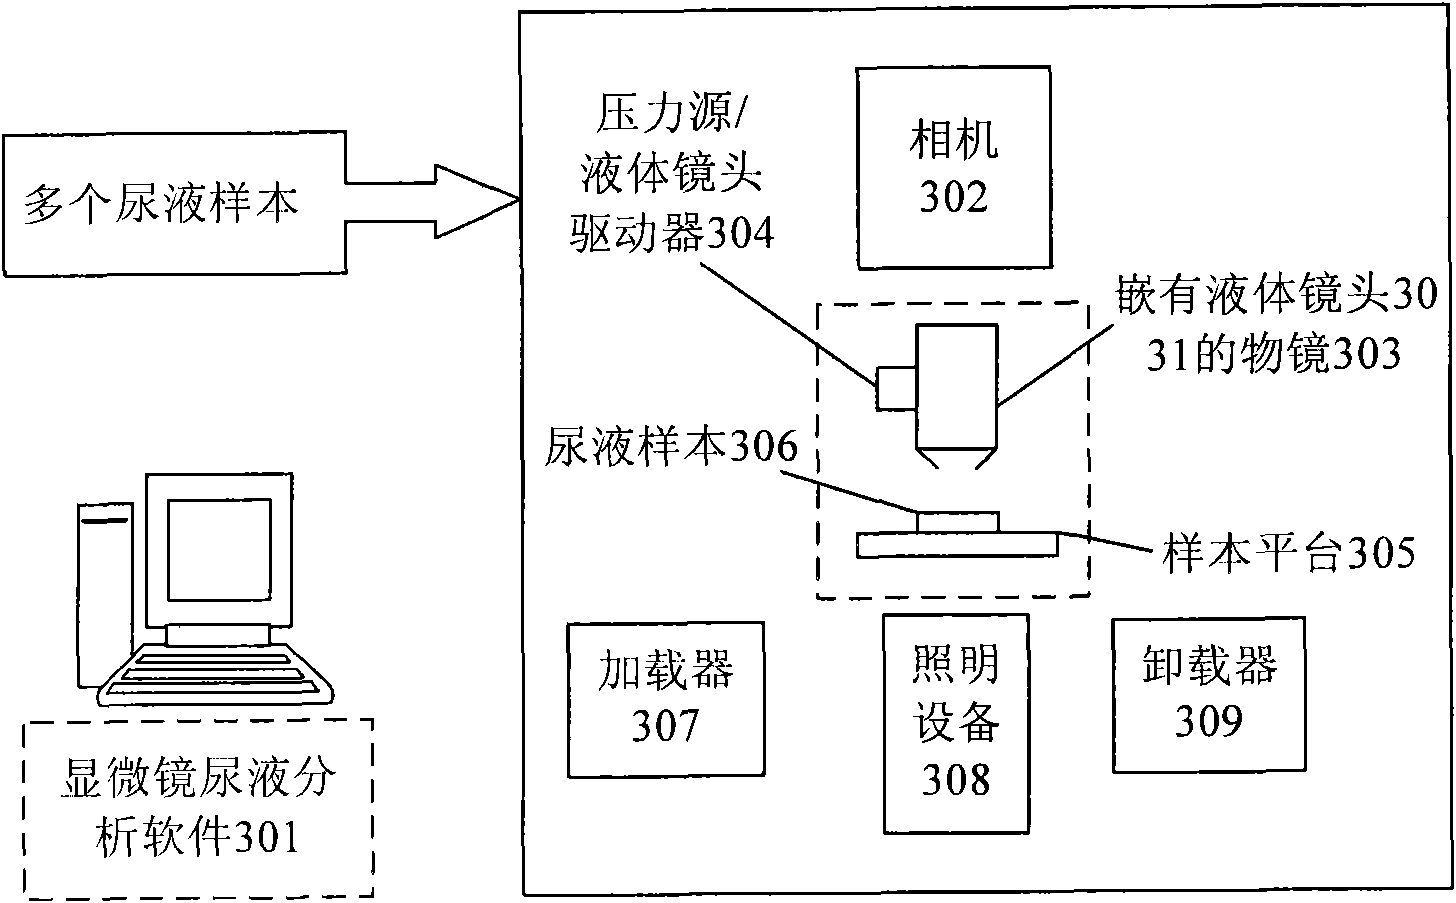 Body fluid analysis system as well as image processing device and method for body fluid analysis